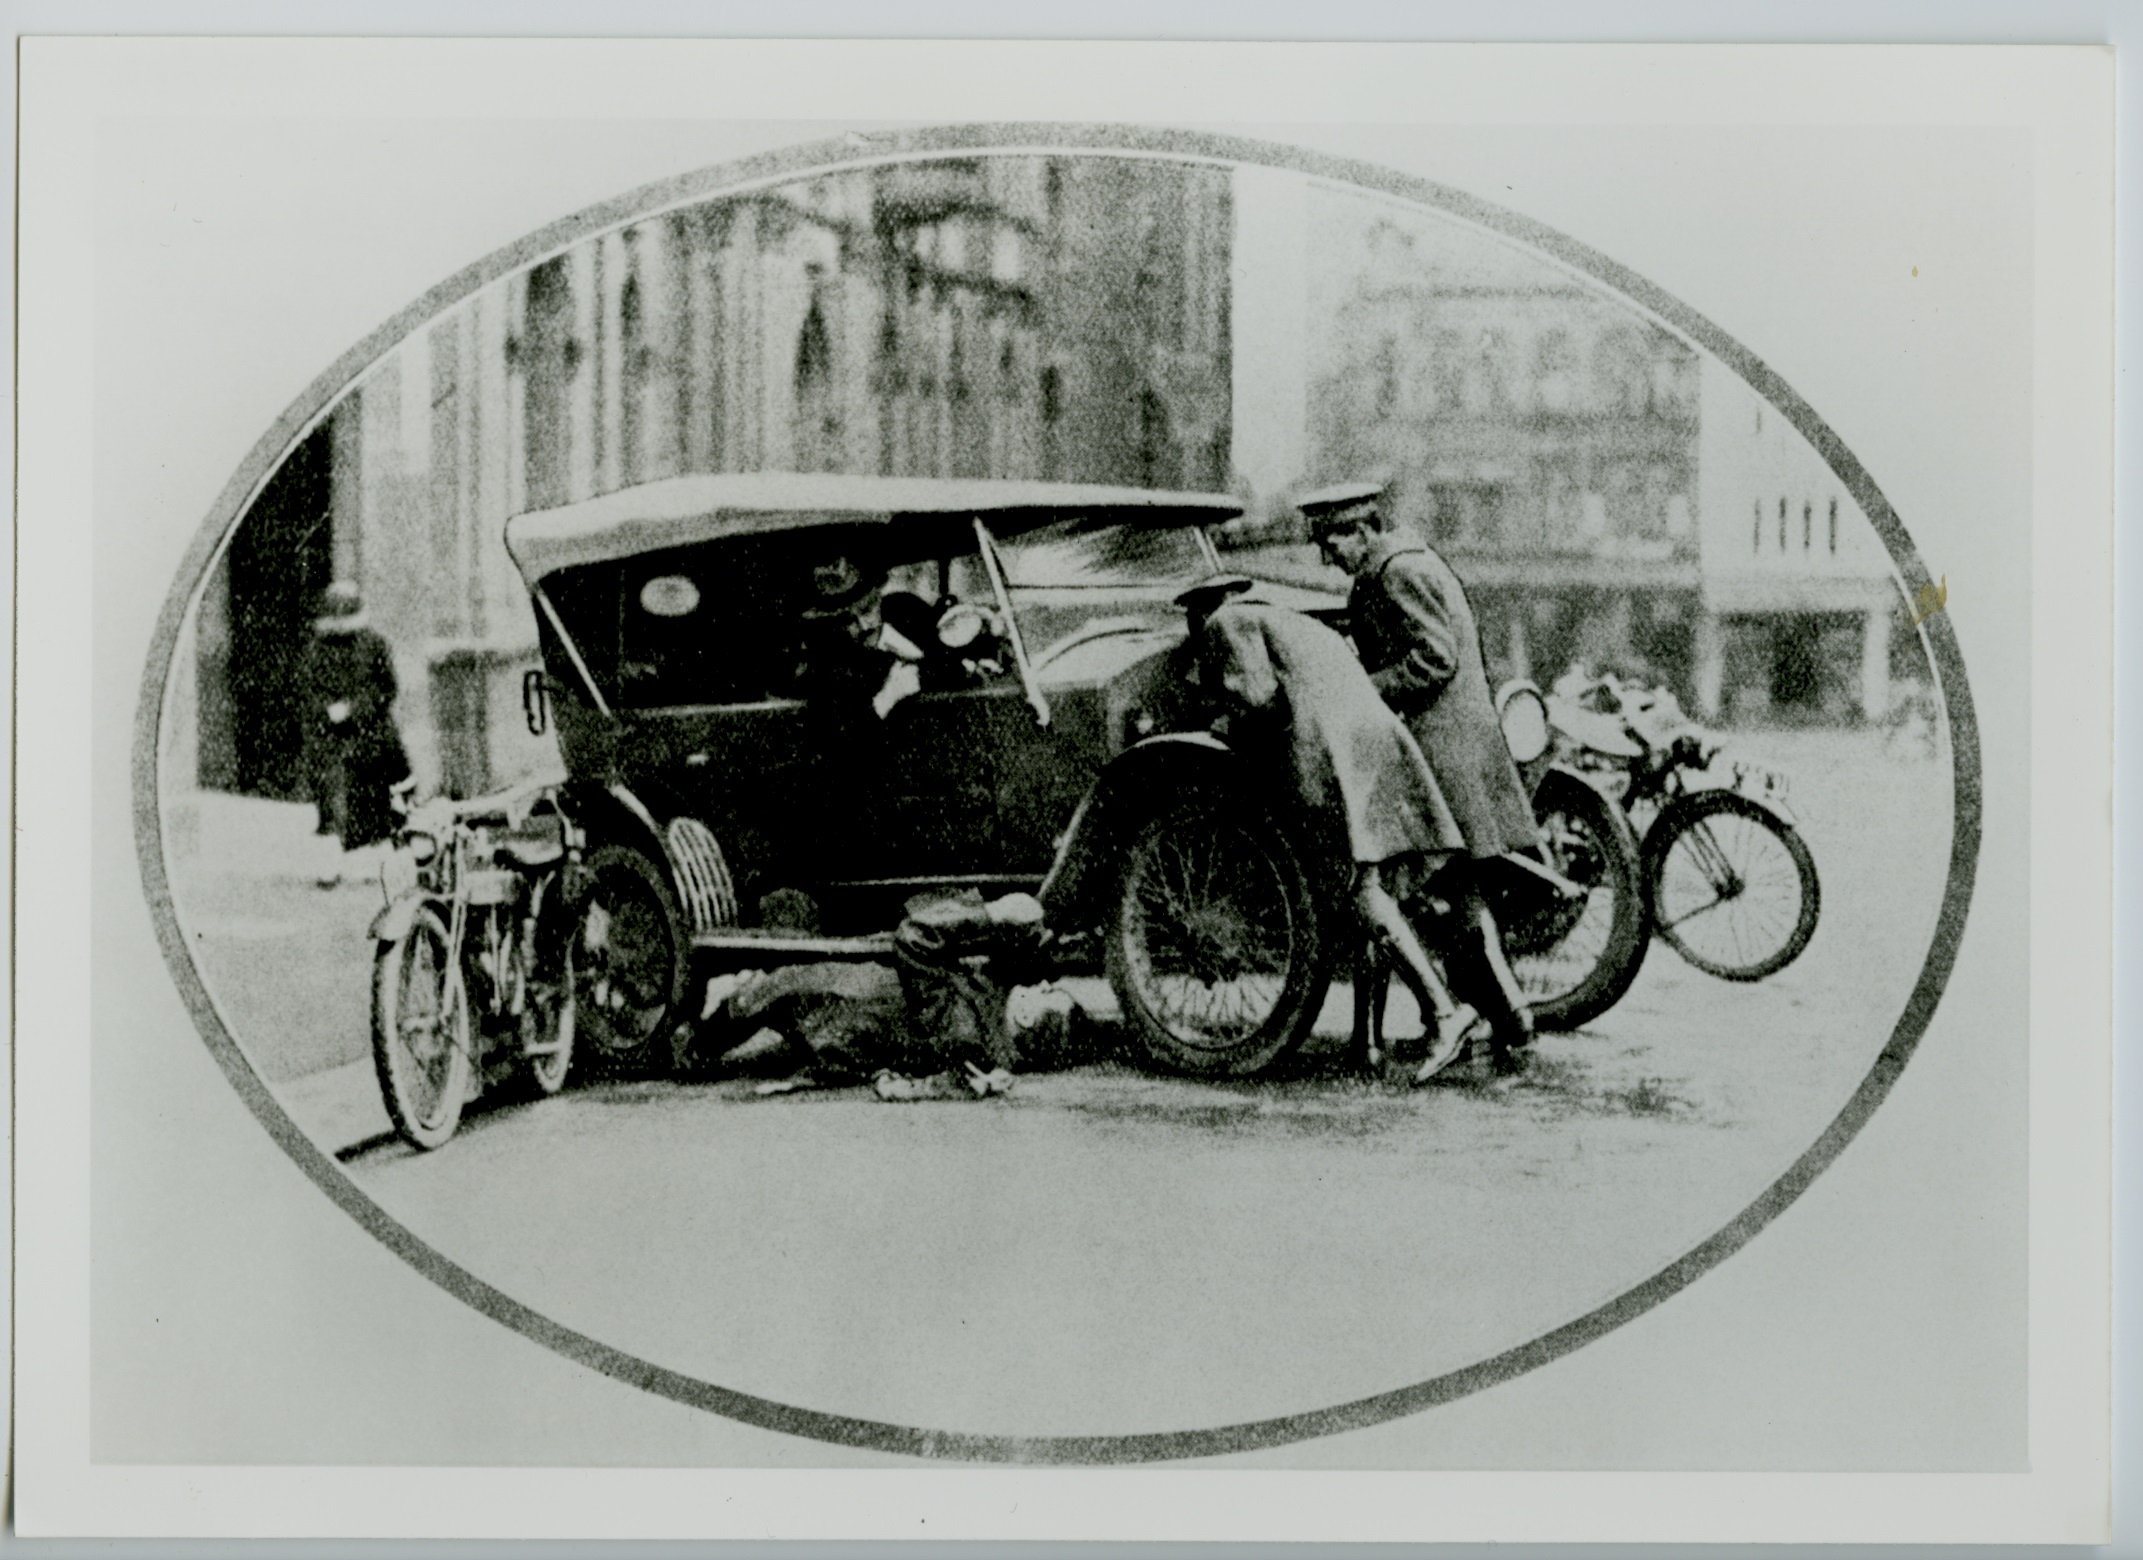 Earliest known image of NRMA road service circa 1920